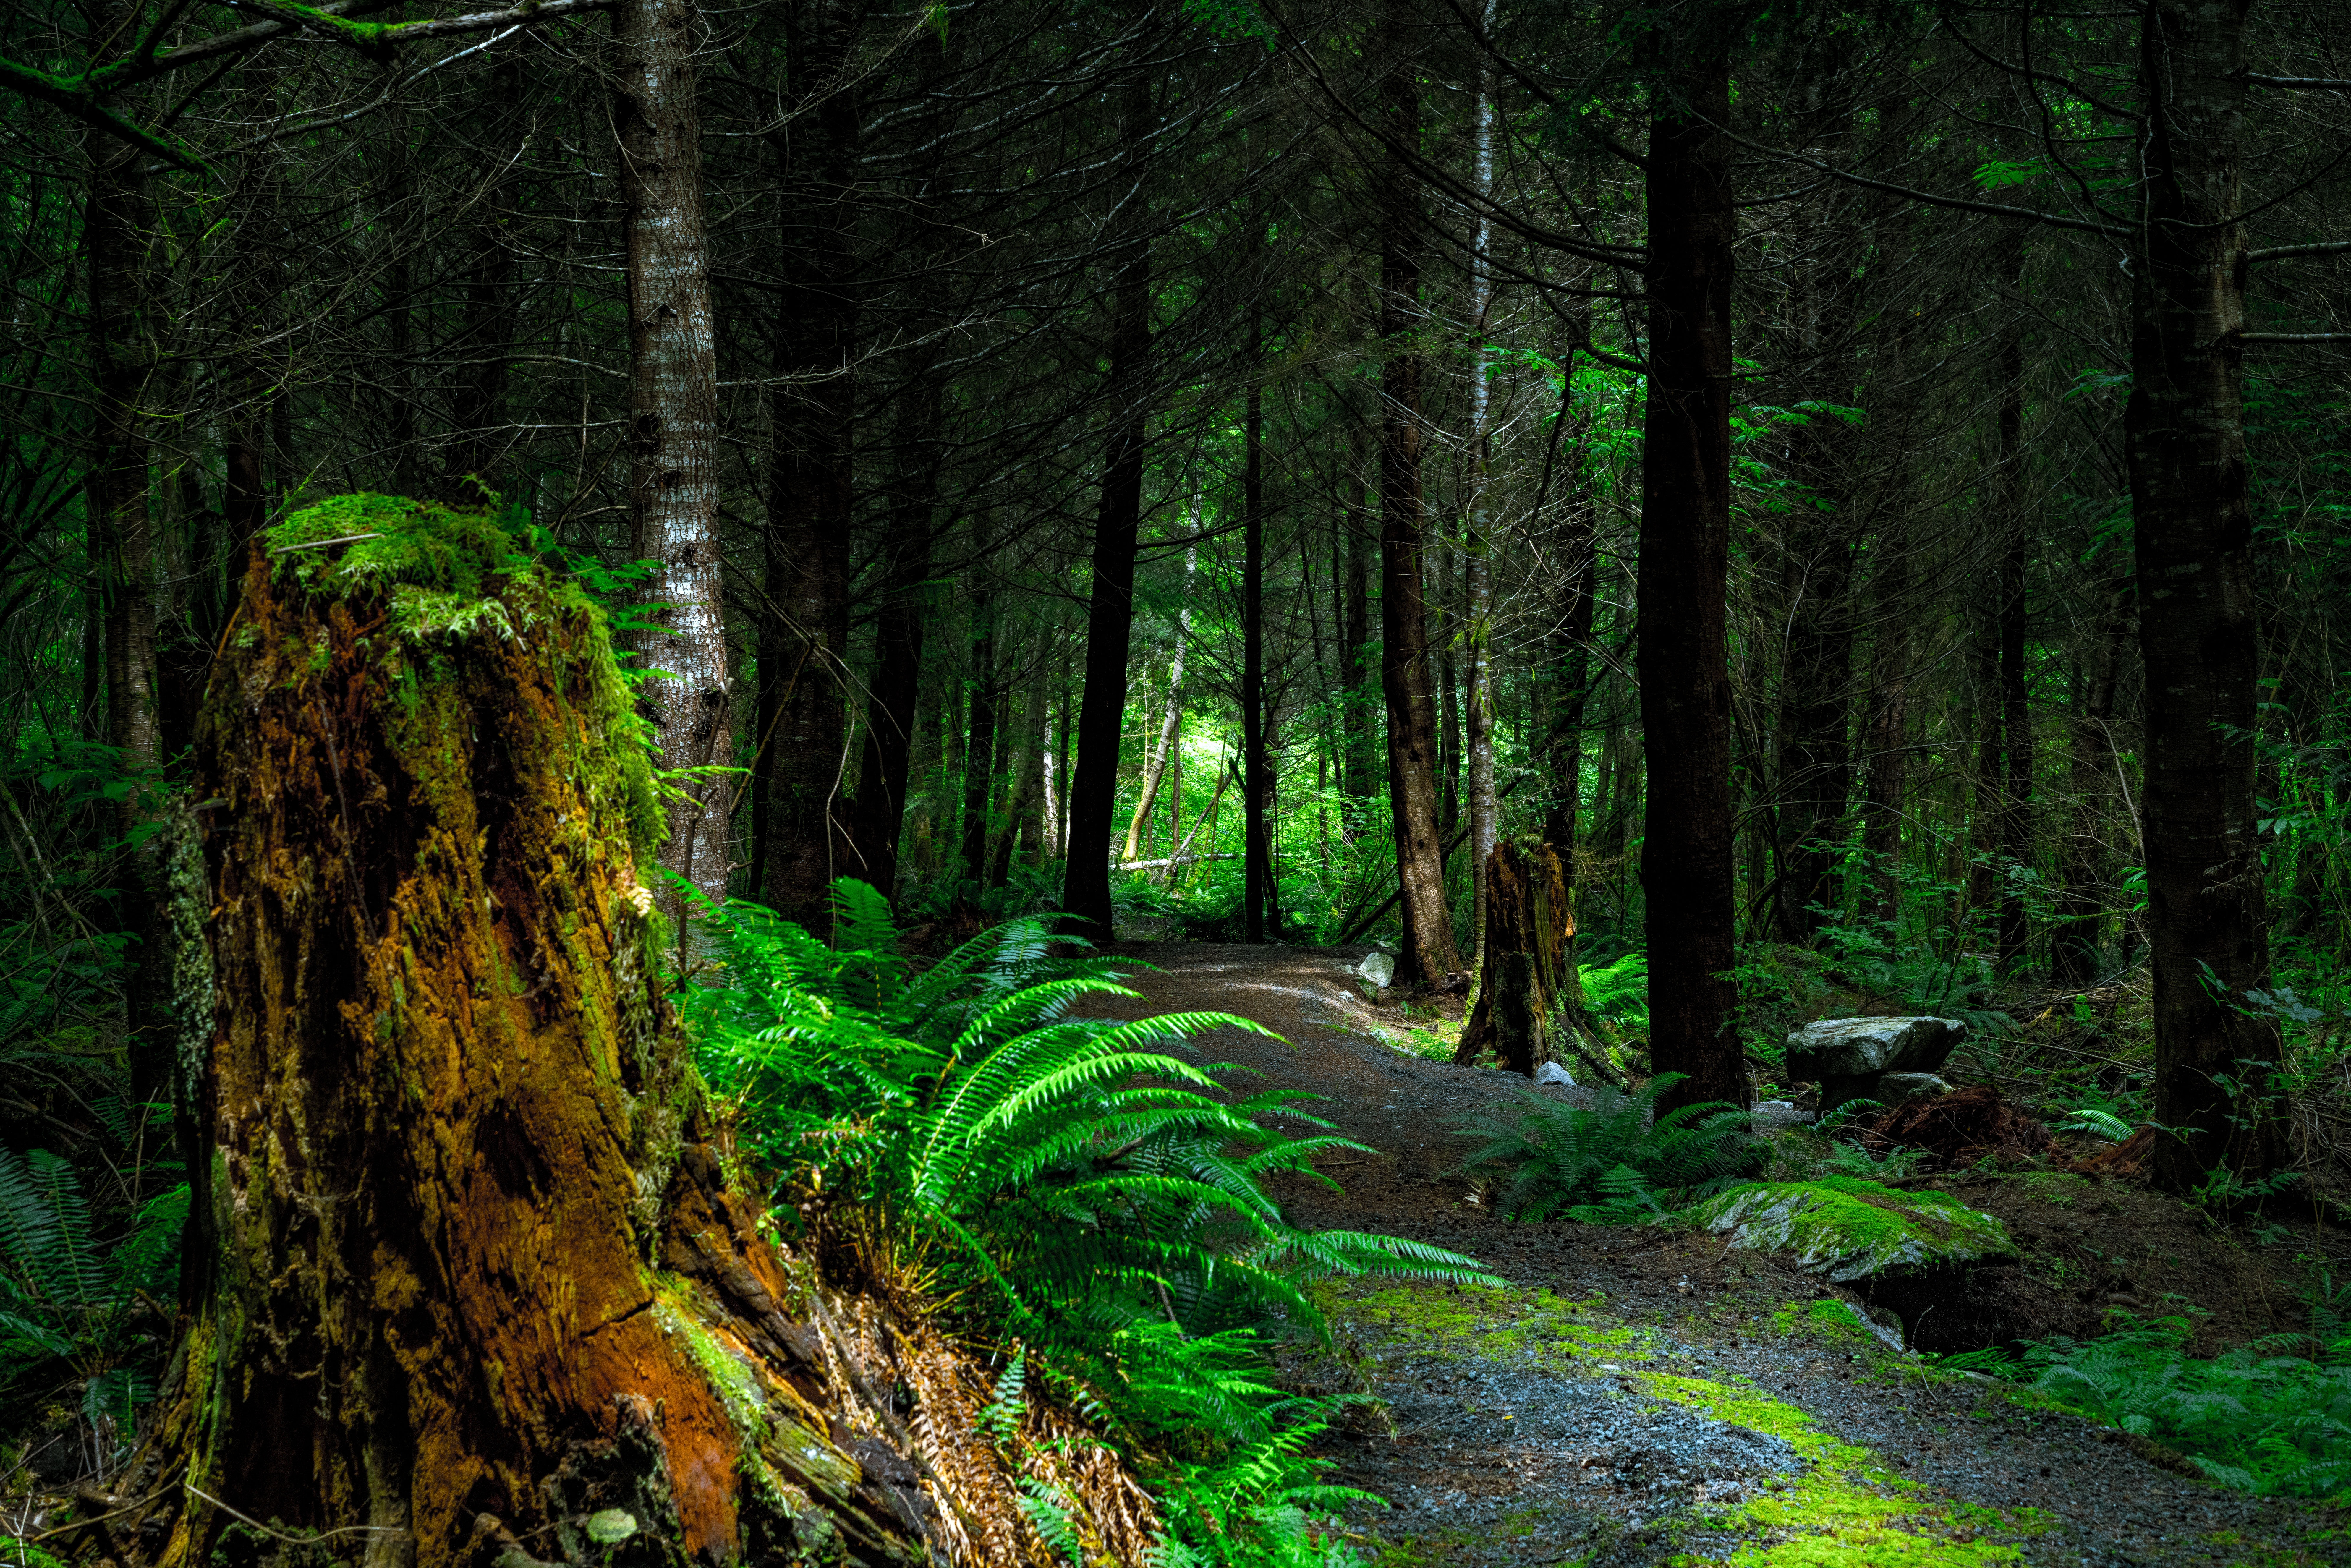 vancouver island, canada, nature, trees, forest, path